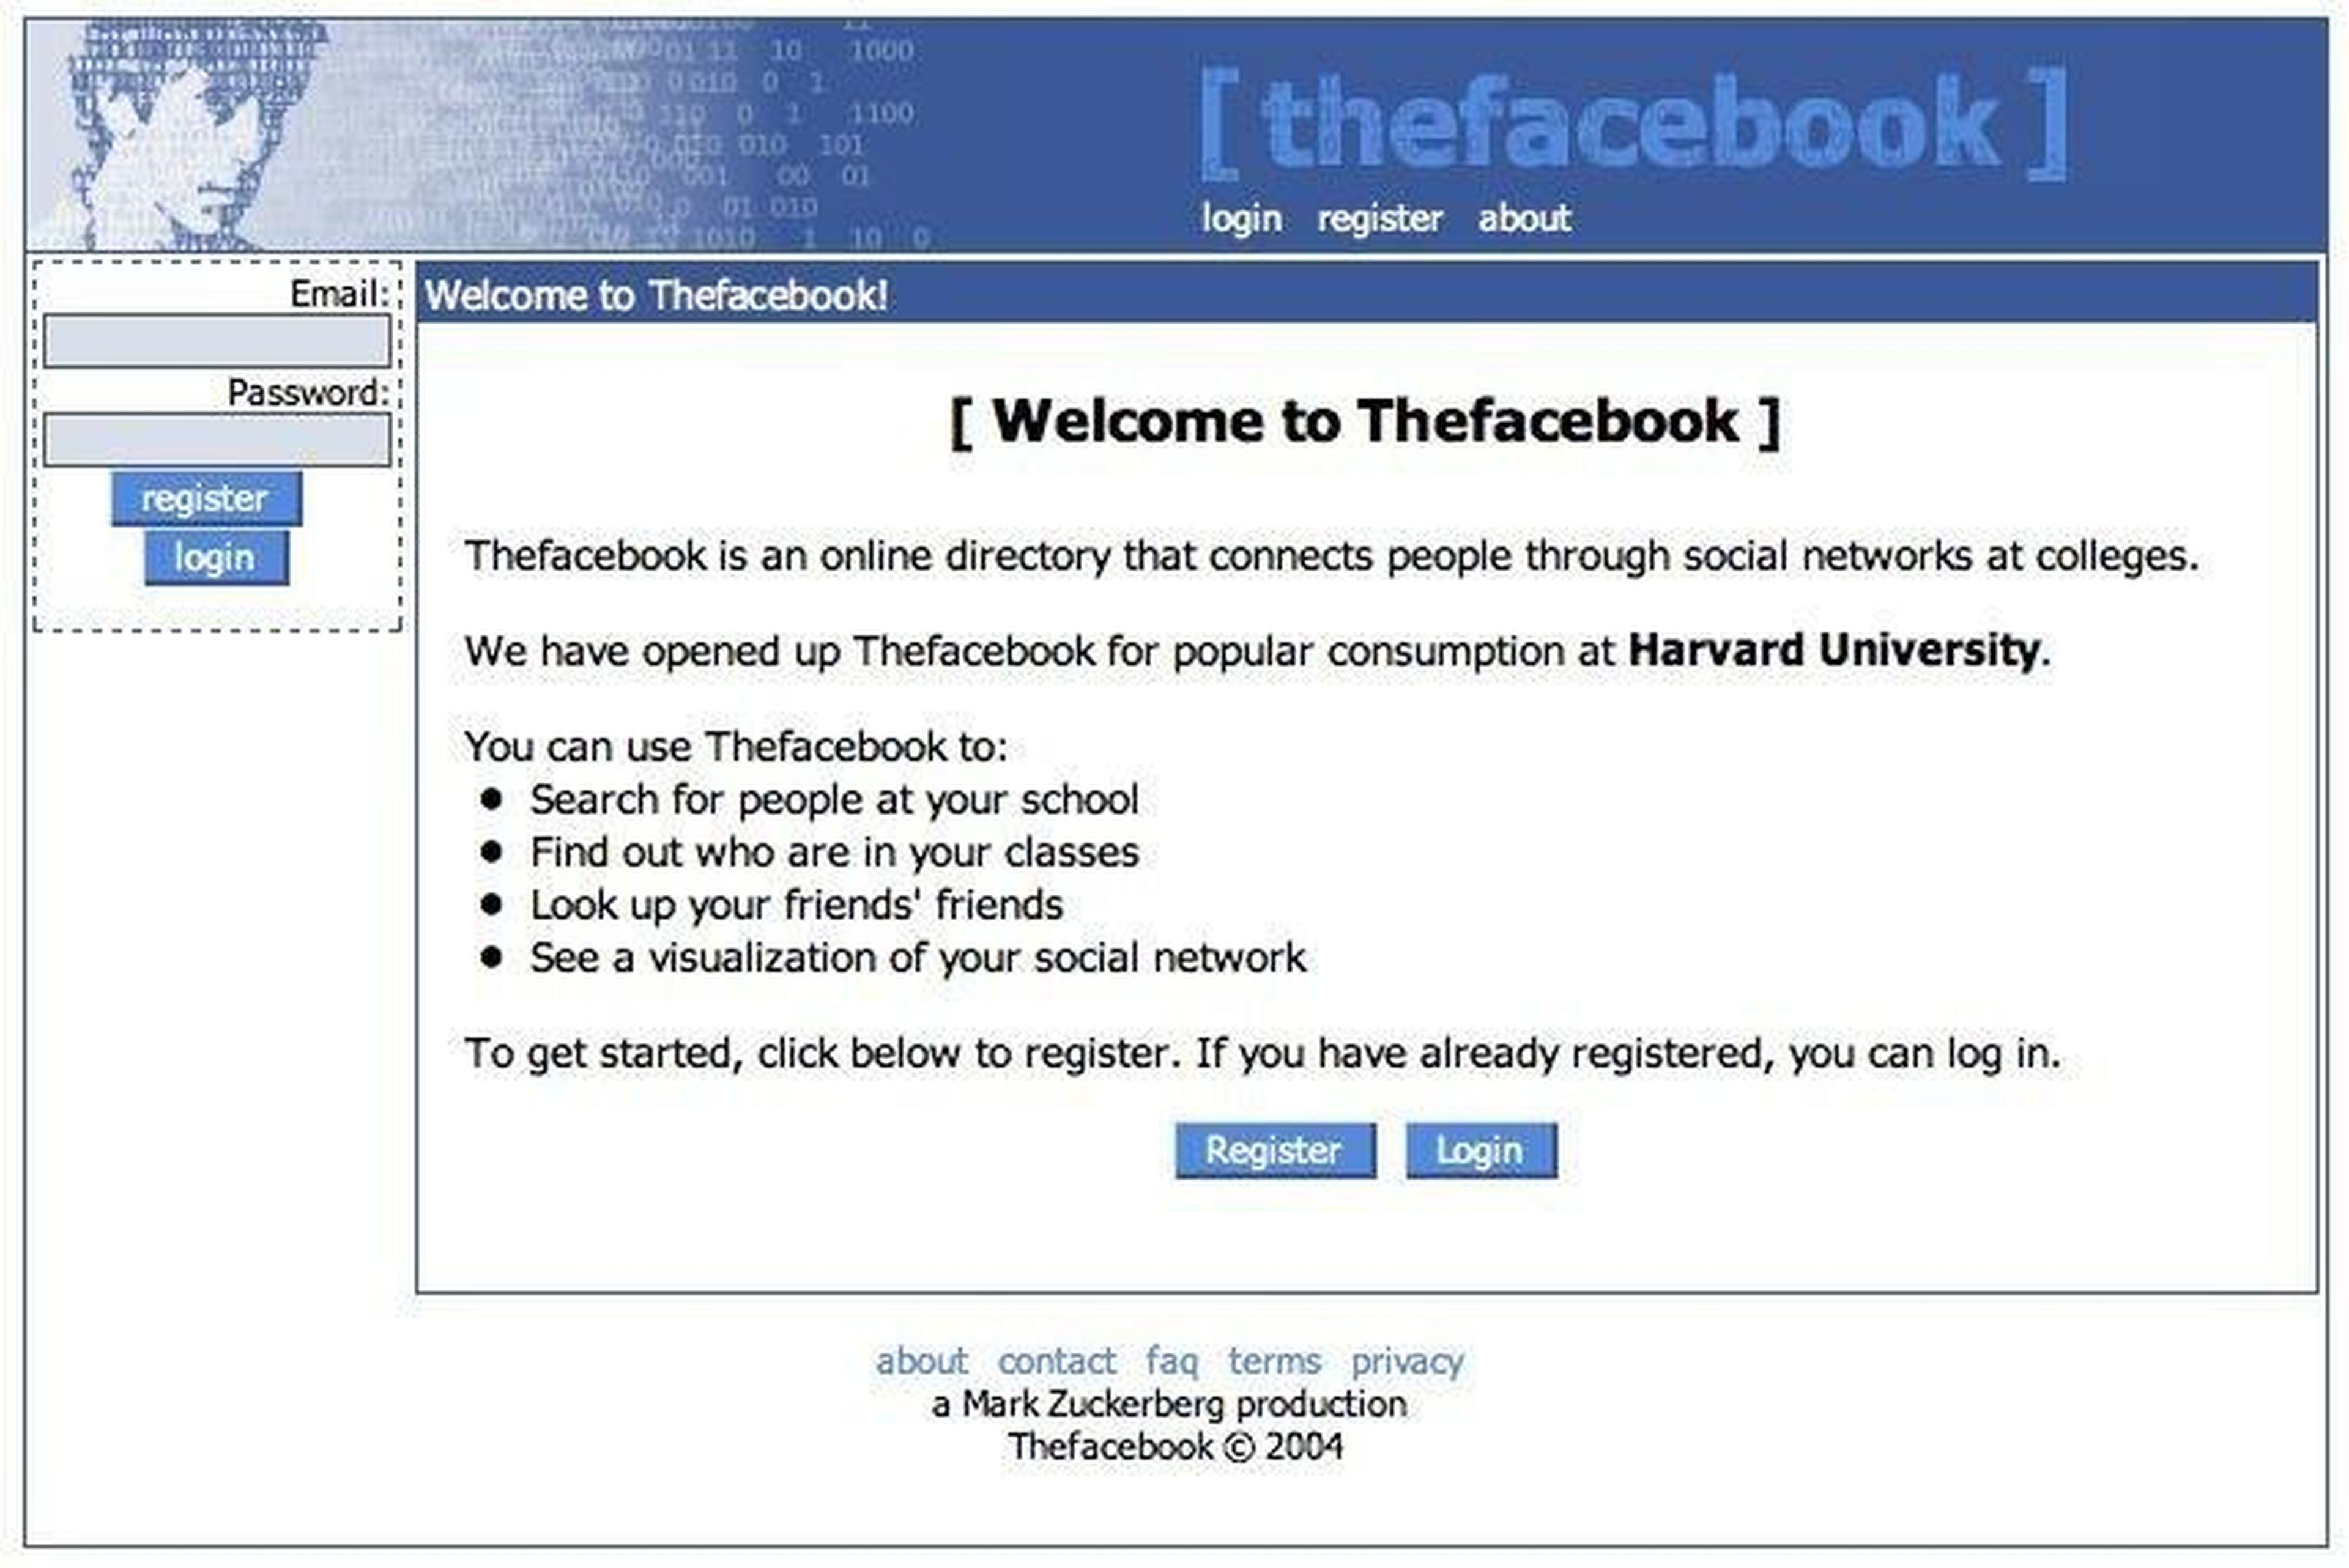 Here's what the original Facebook — sorry, "The" Facebook — layout looked like when it launched in 2004.